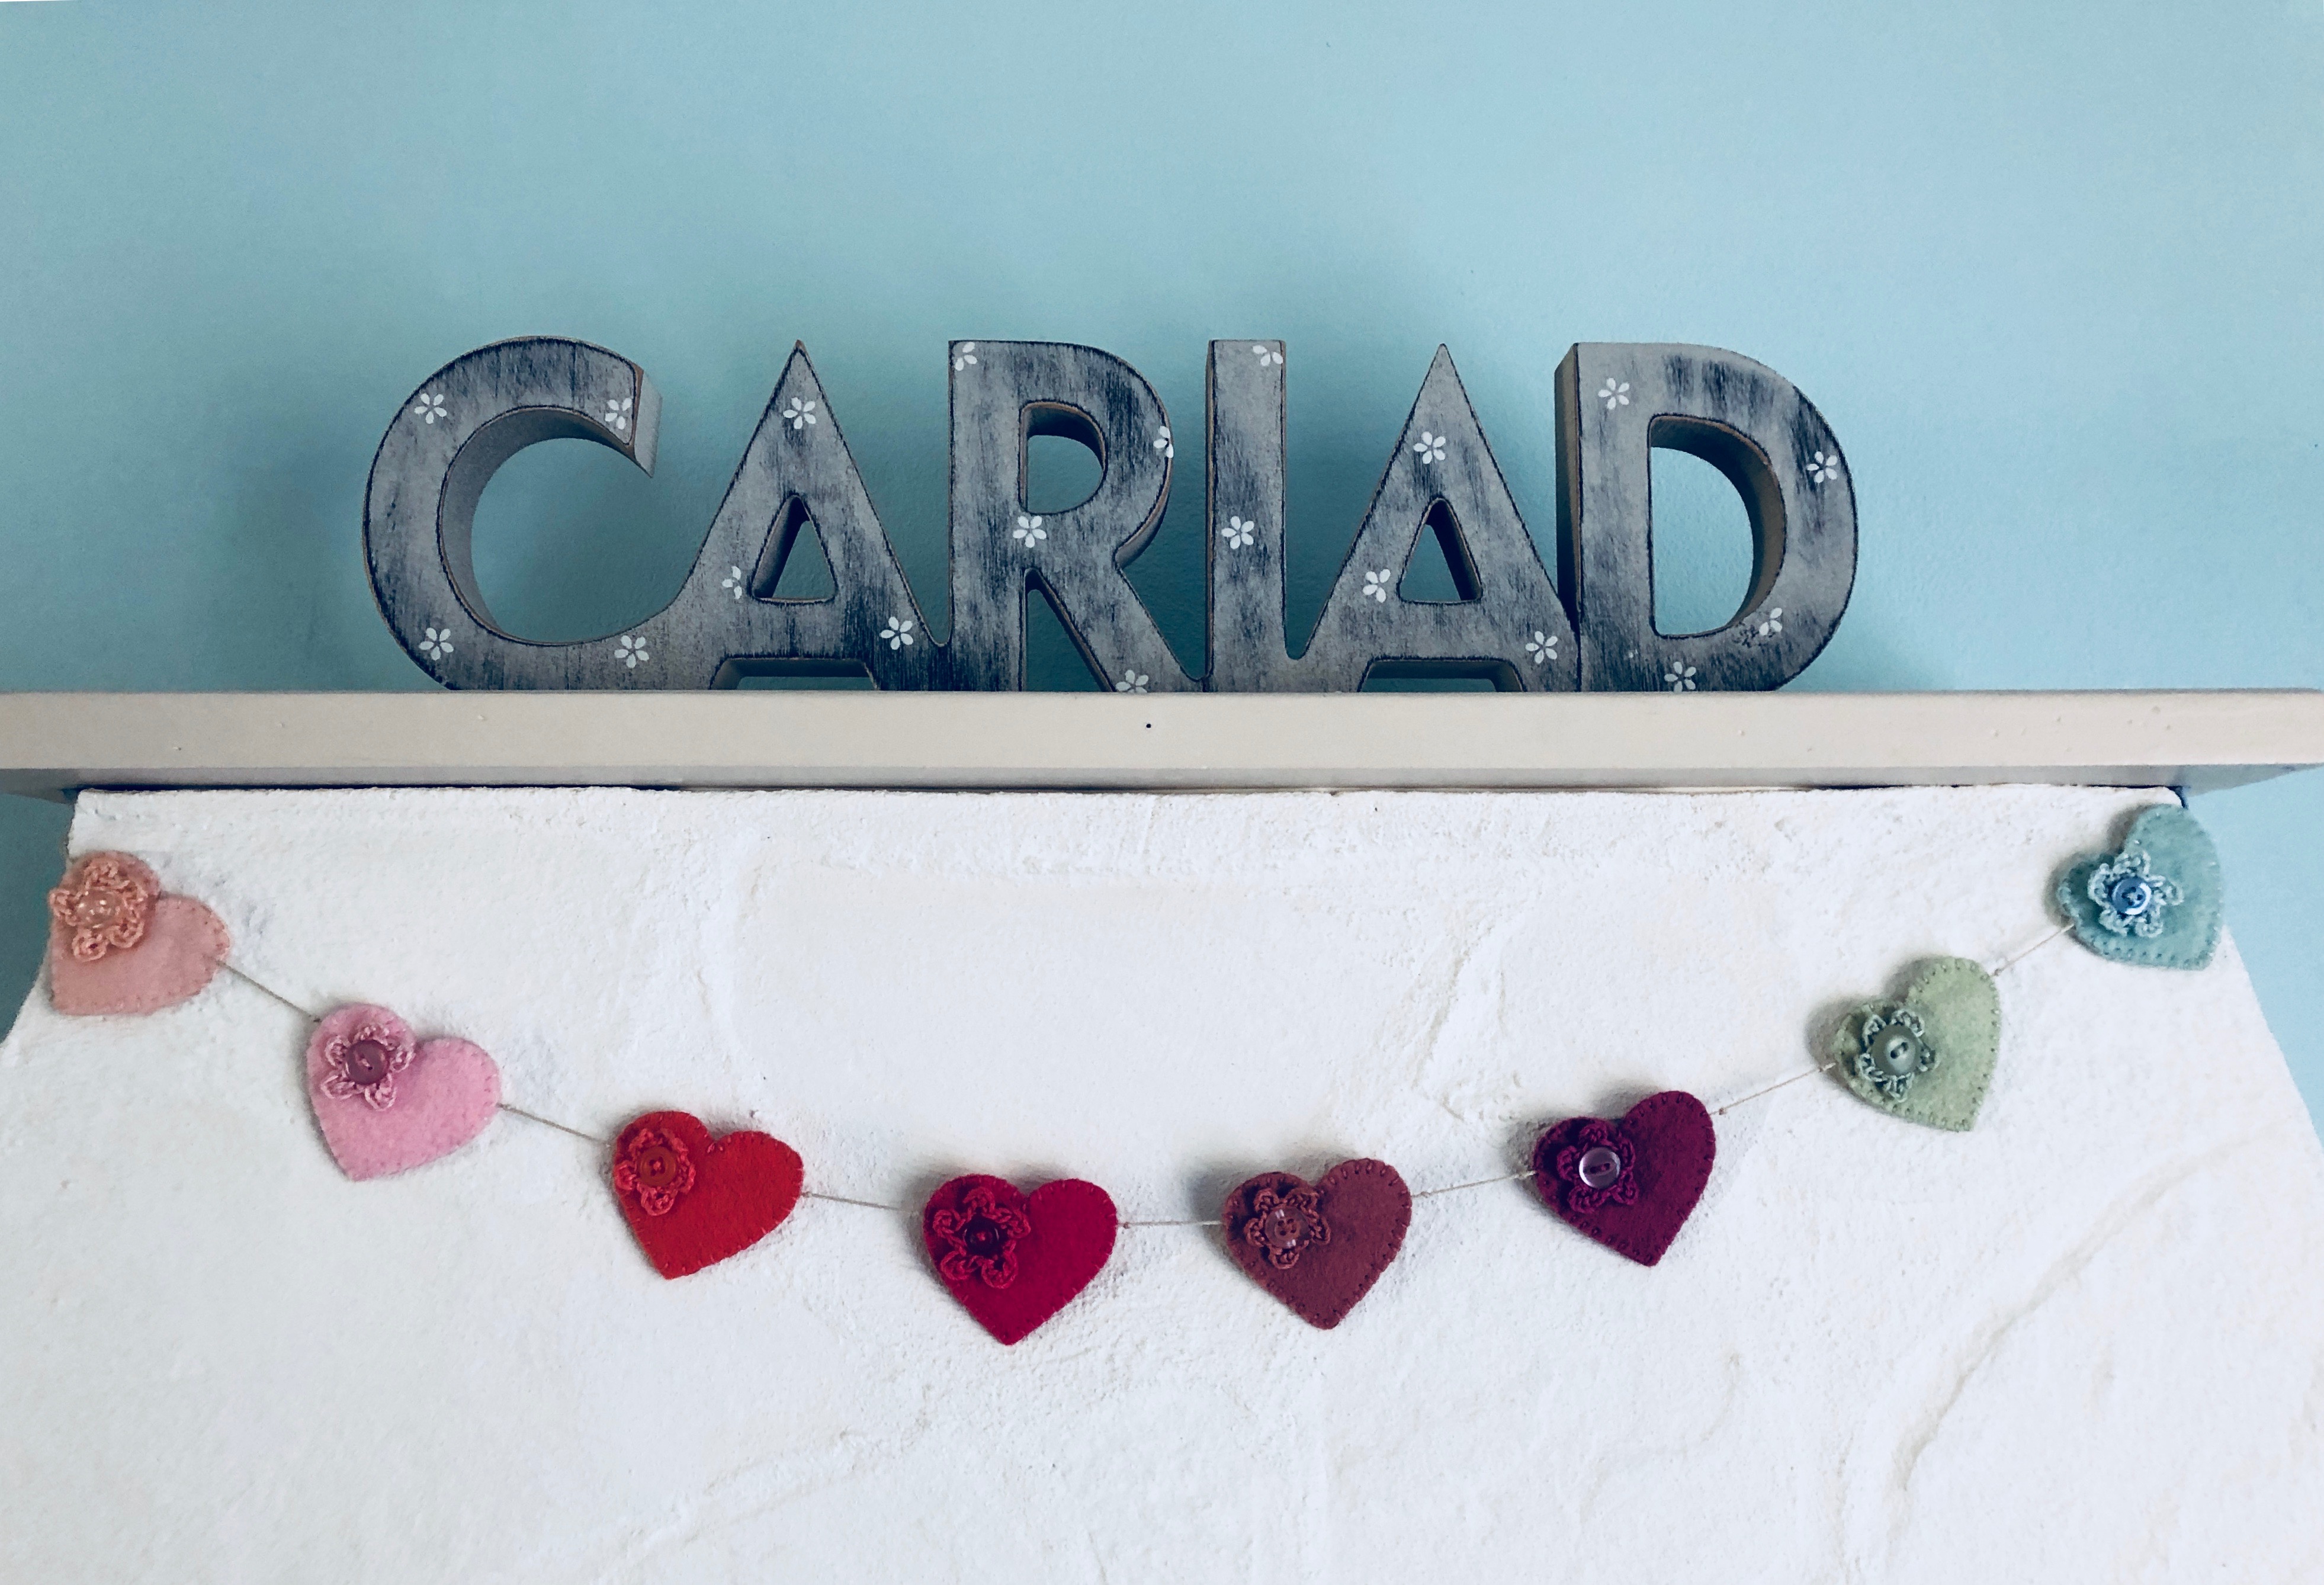 Hand stitched multi coloured felt heart garland with tiny crocheted flowers.